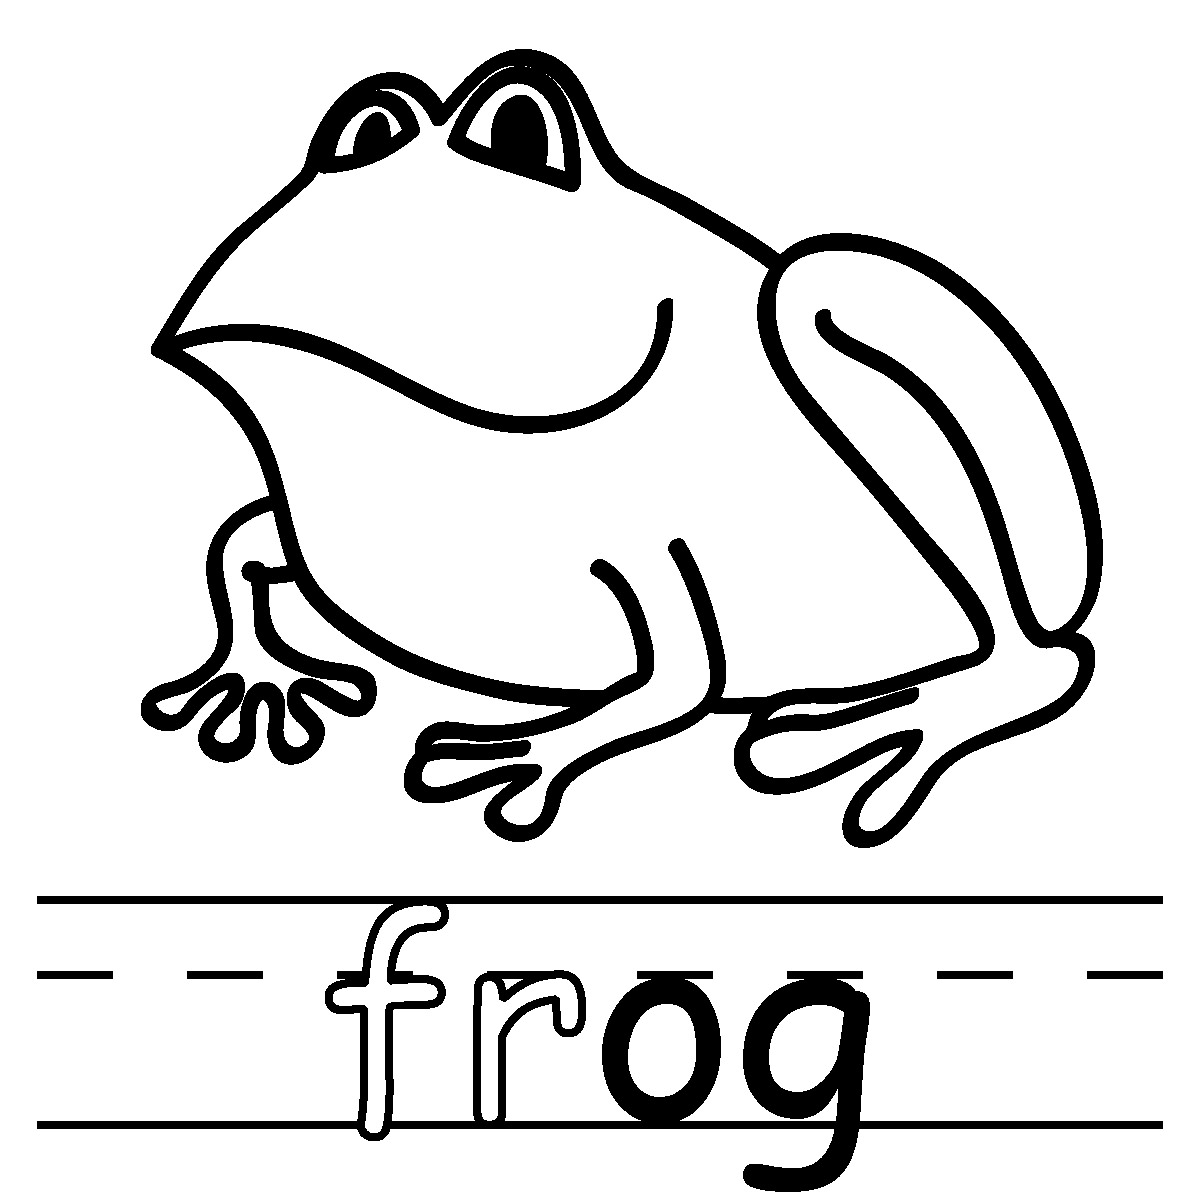 Tree Frog Clip Art Black And White | Clipart Panda - Free Clipart ...